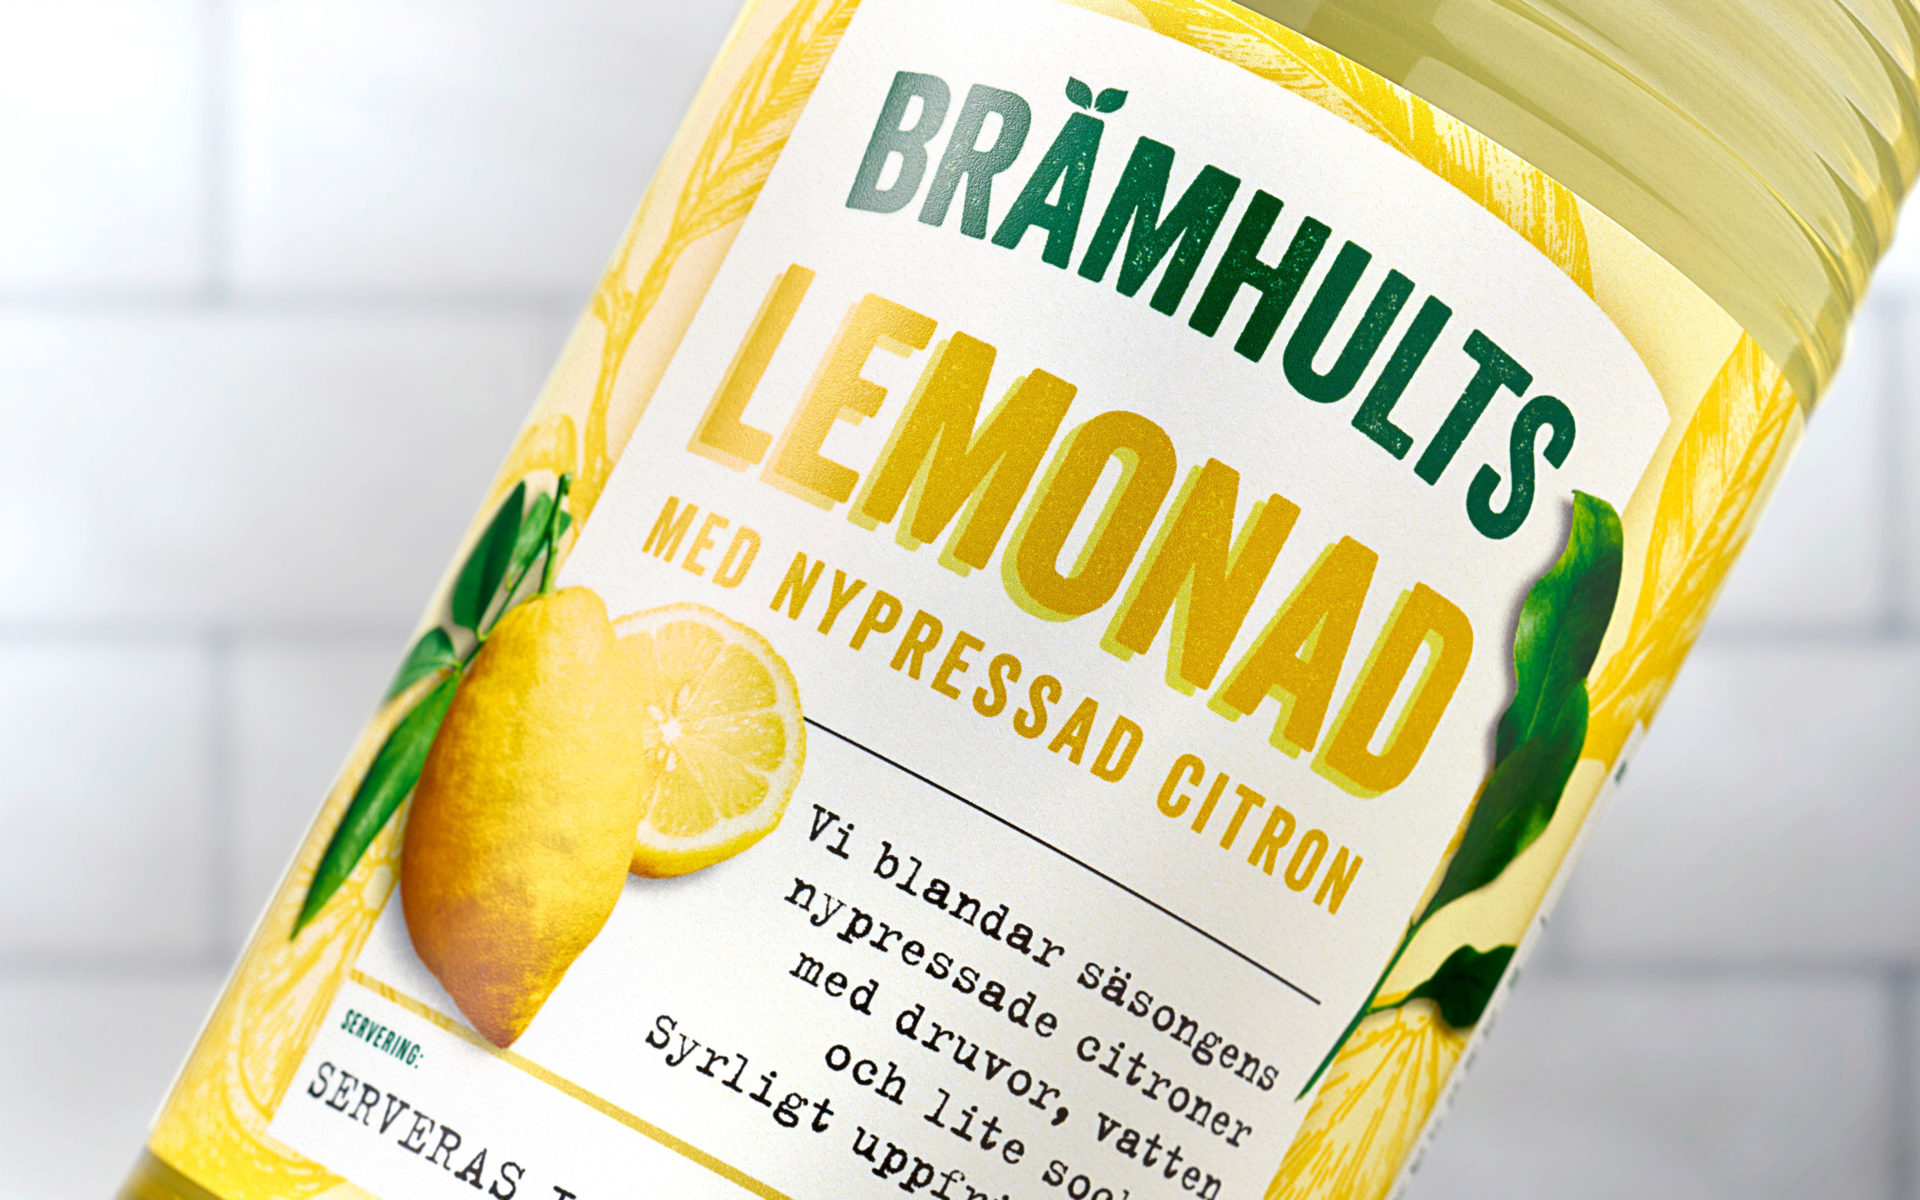 Redesign of one of Sweden’s Leading Brands within the Fresh Juice Category